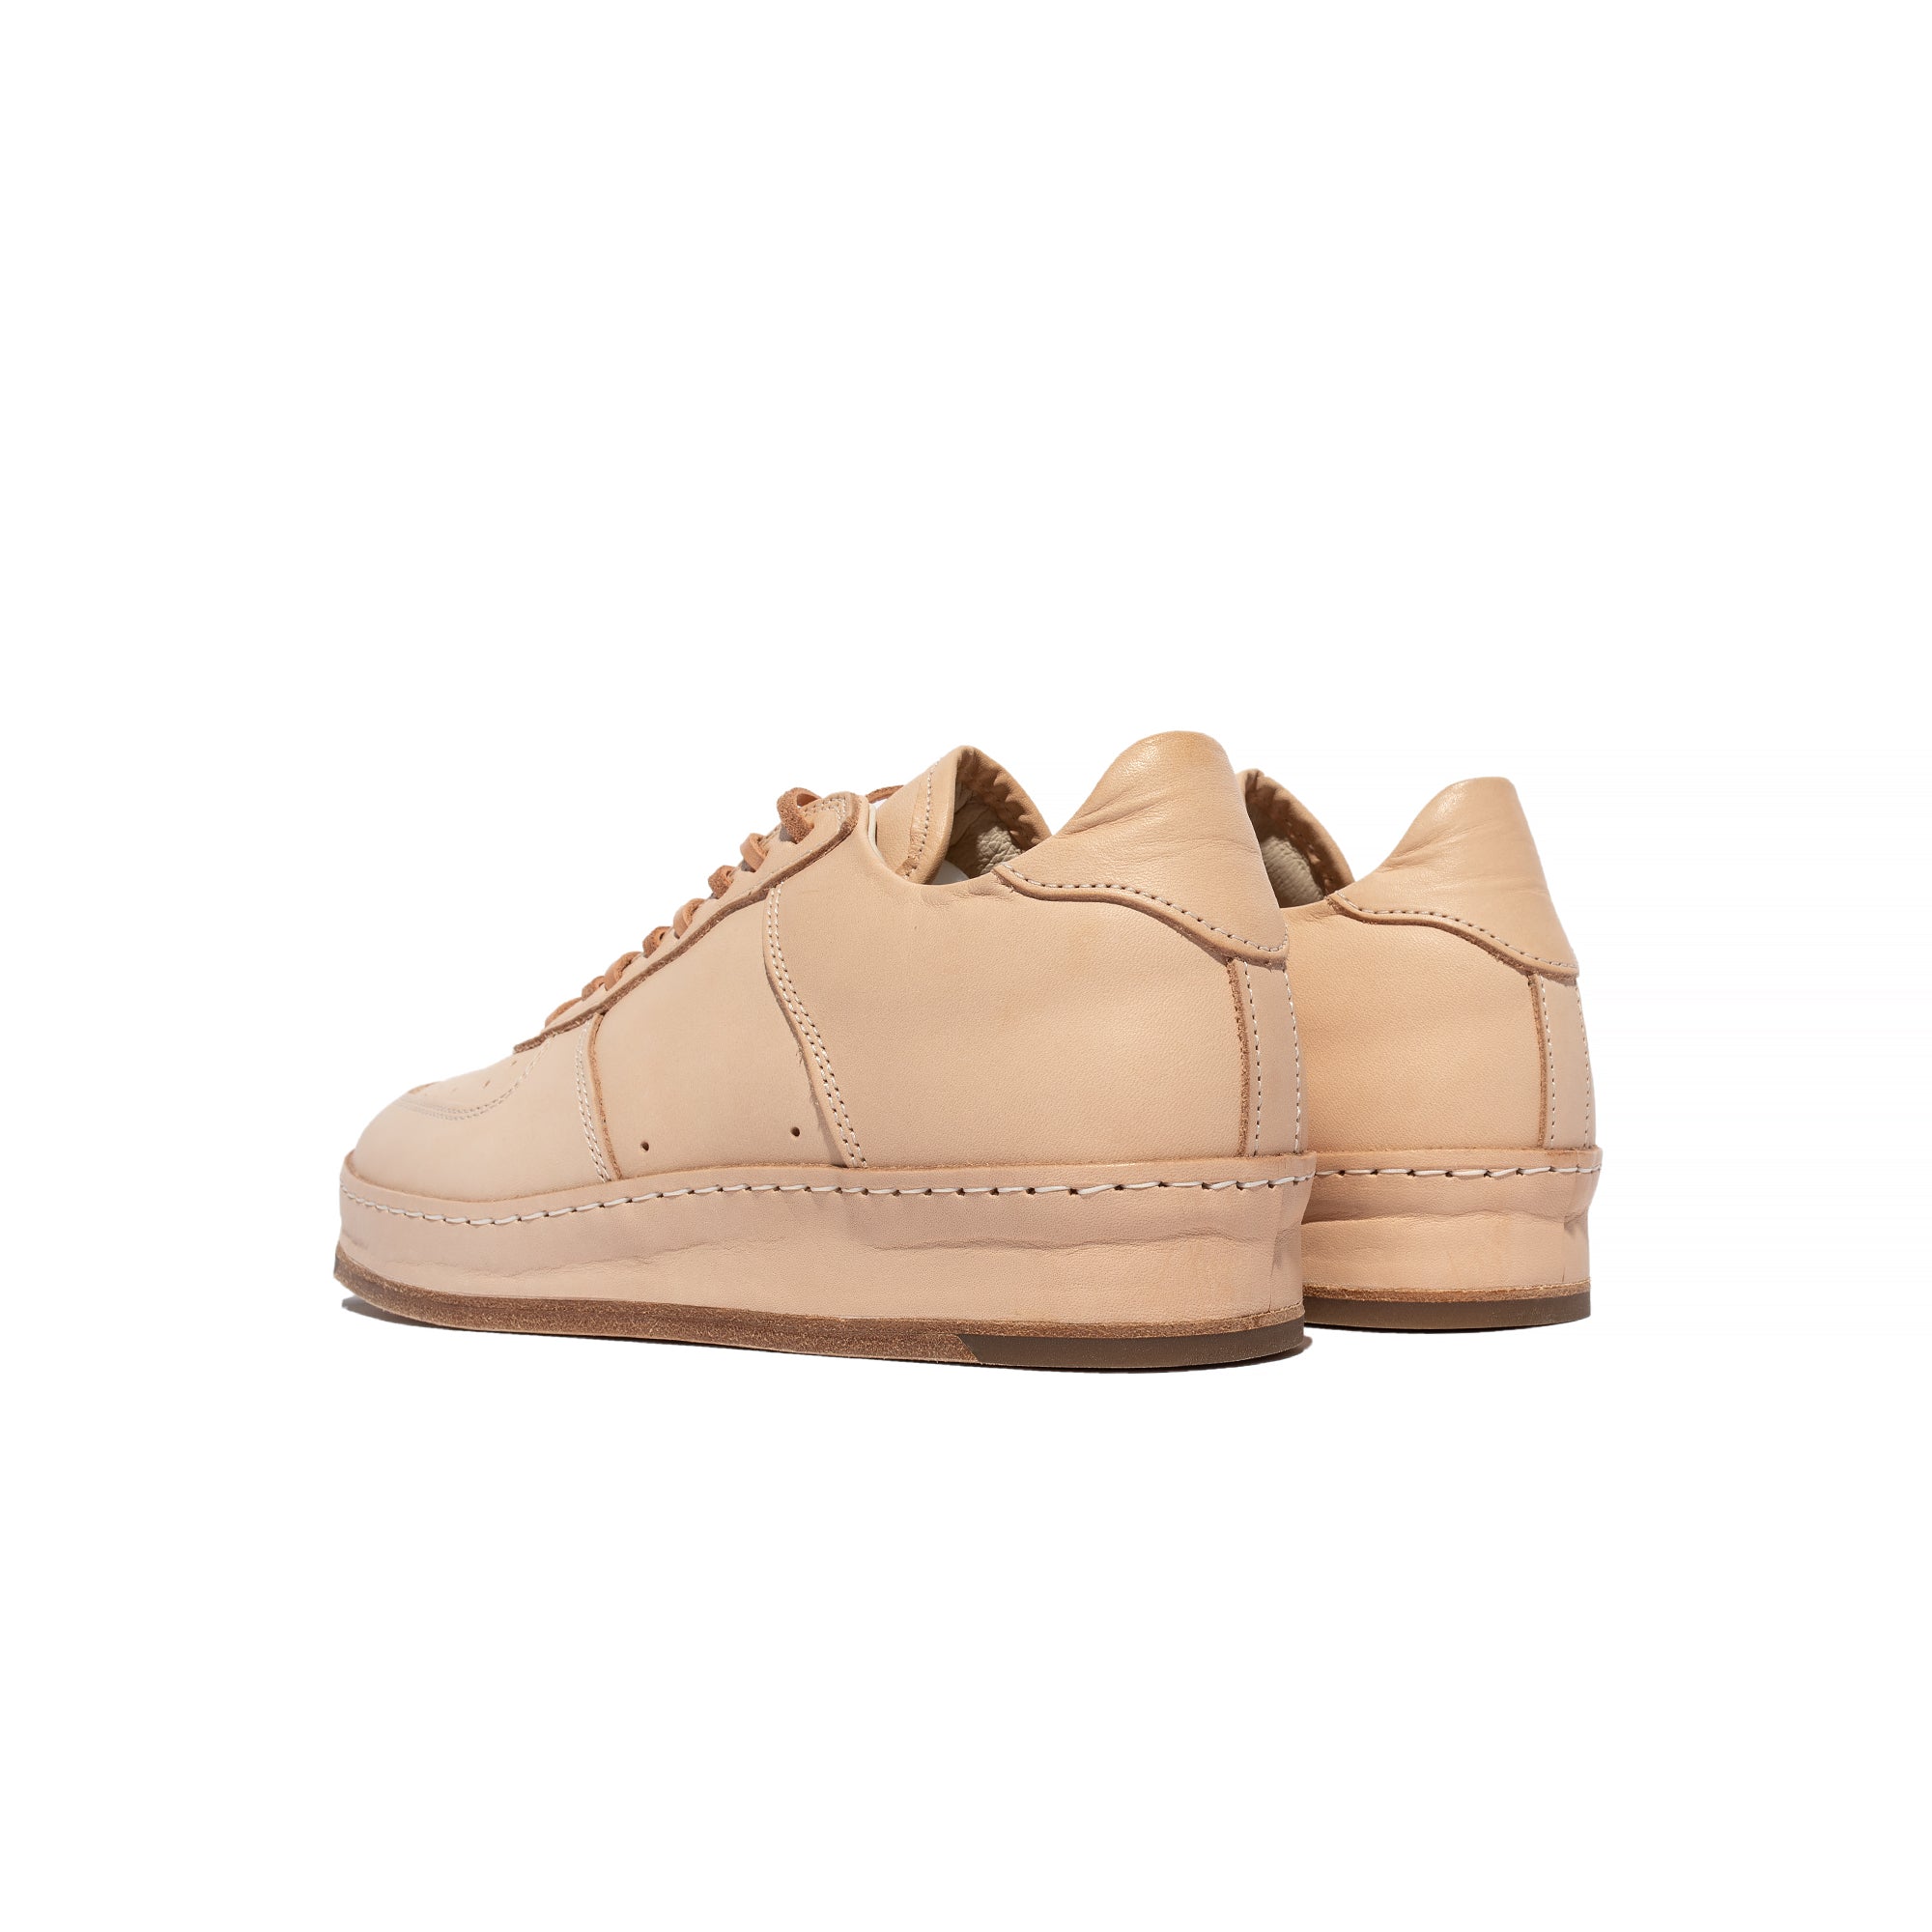 Hender Scheme Mens Manual Industrial Products  Shoes – Extra Butter